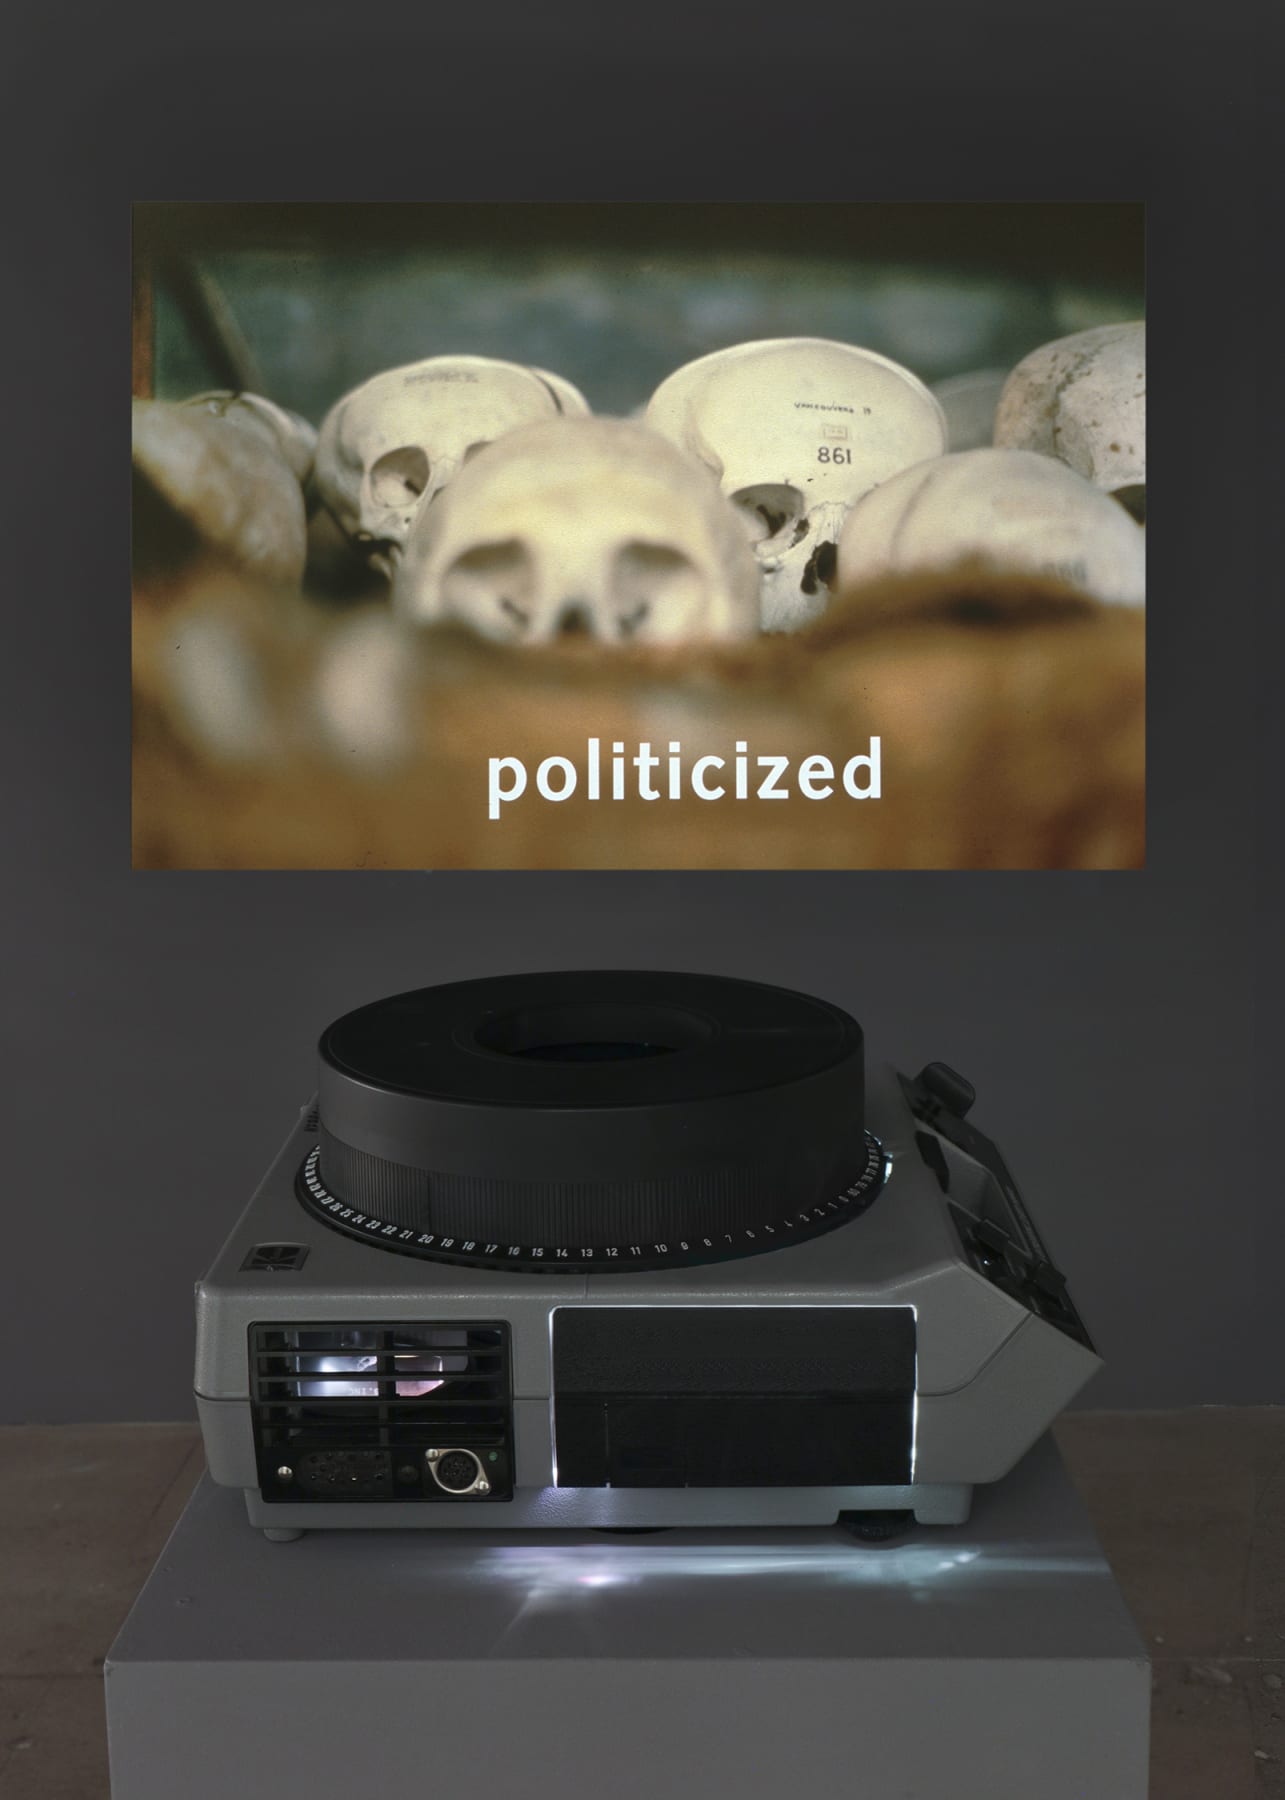 Installation view of Lothar Baumgarten's projection, containing skulls with the word "politicized" underneath. 